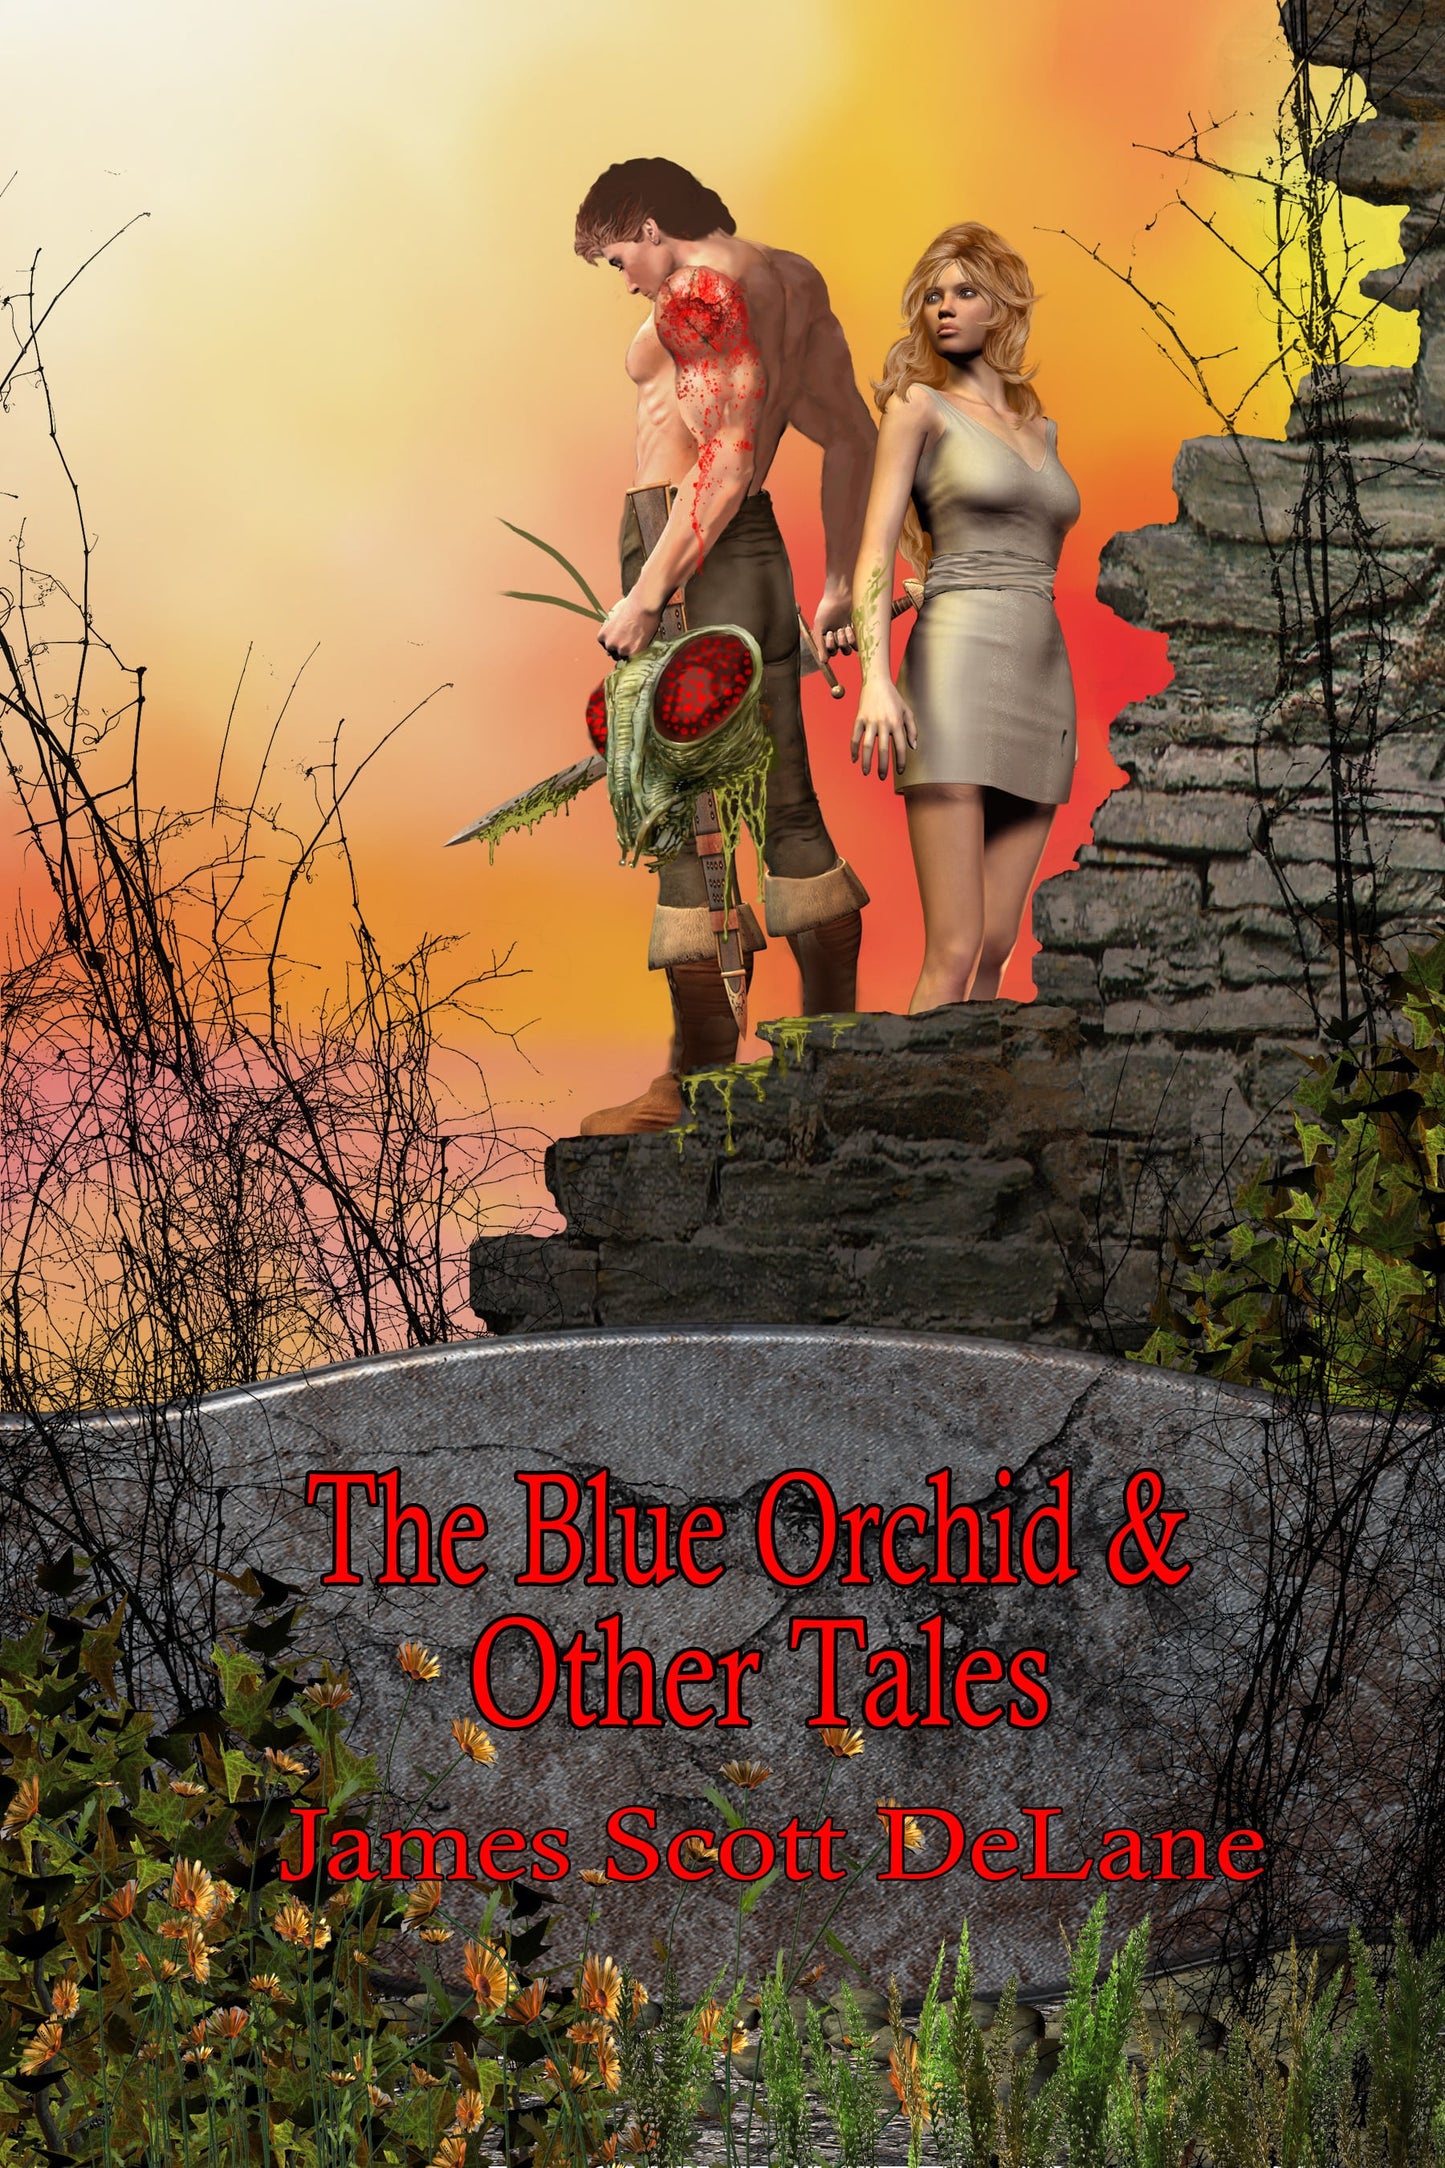 The Blue Orchid & Other Tales